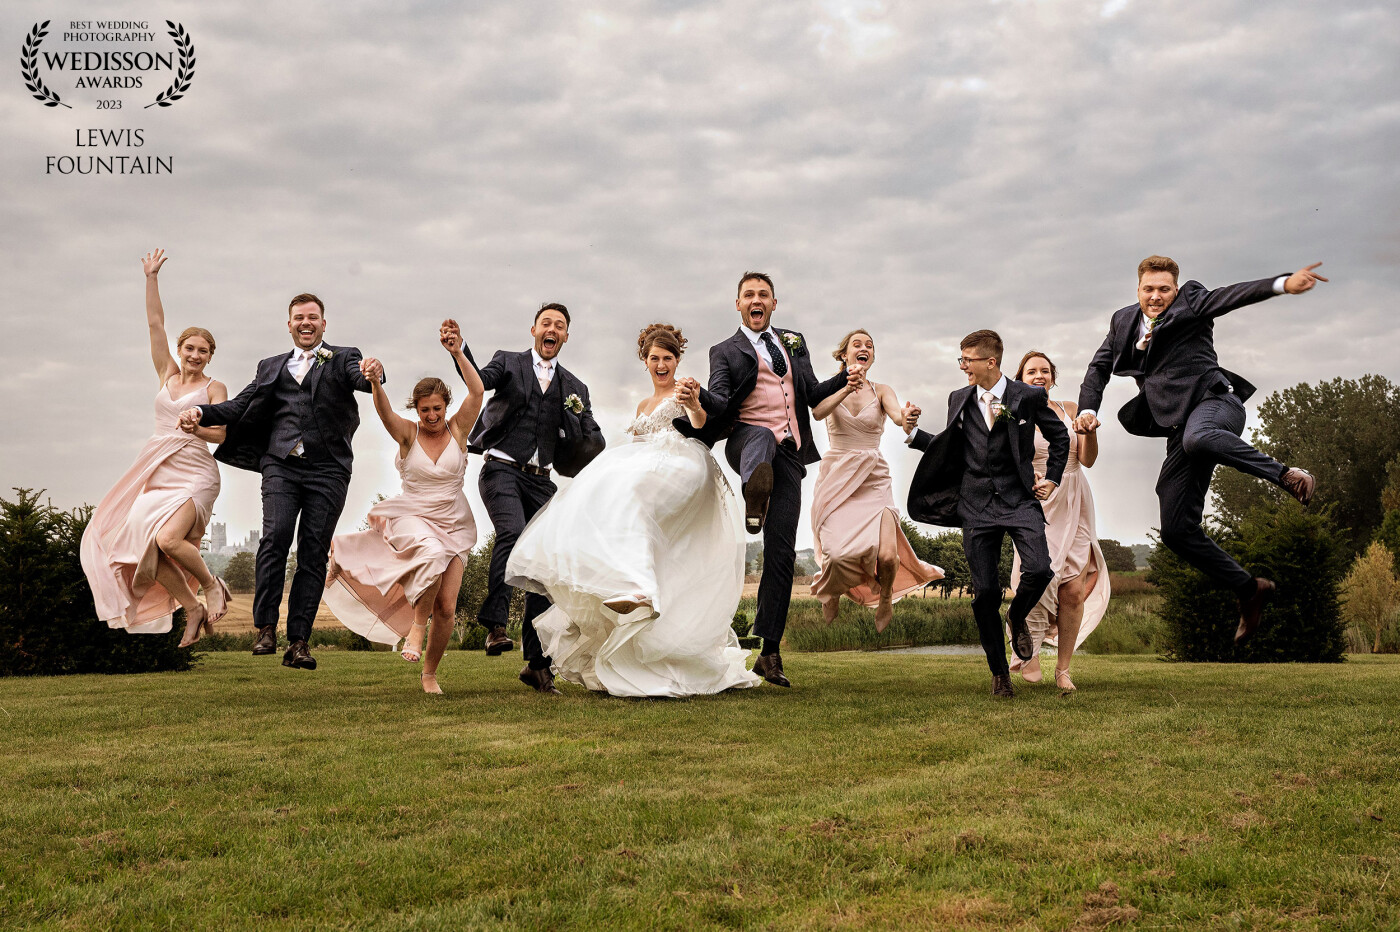 Klea & Dan had the wildest set of bridesmaids and groomsmen at their recent Old Hall wedding.<br />
All they wanted to do was have some fun, and who were we to say no 🤪